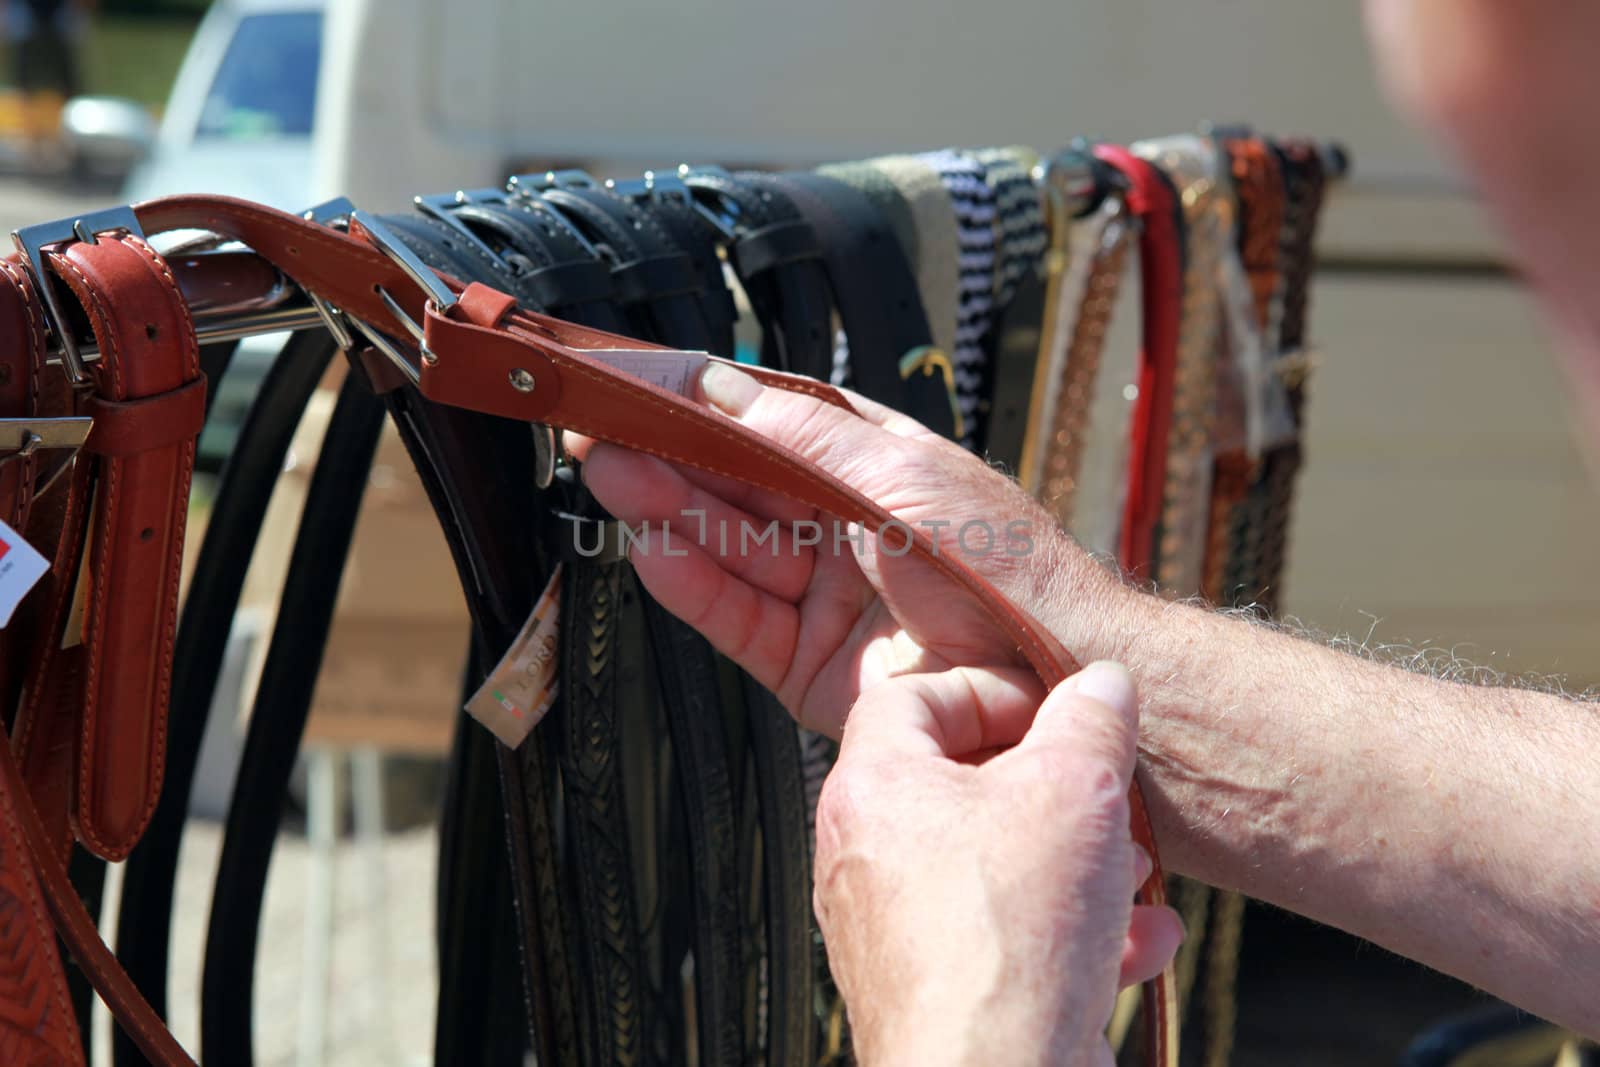 Man shopping for a leather belt by phovoir